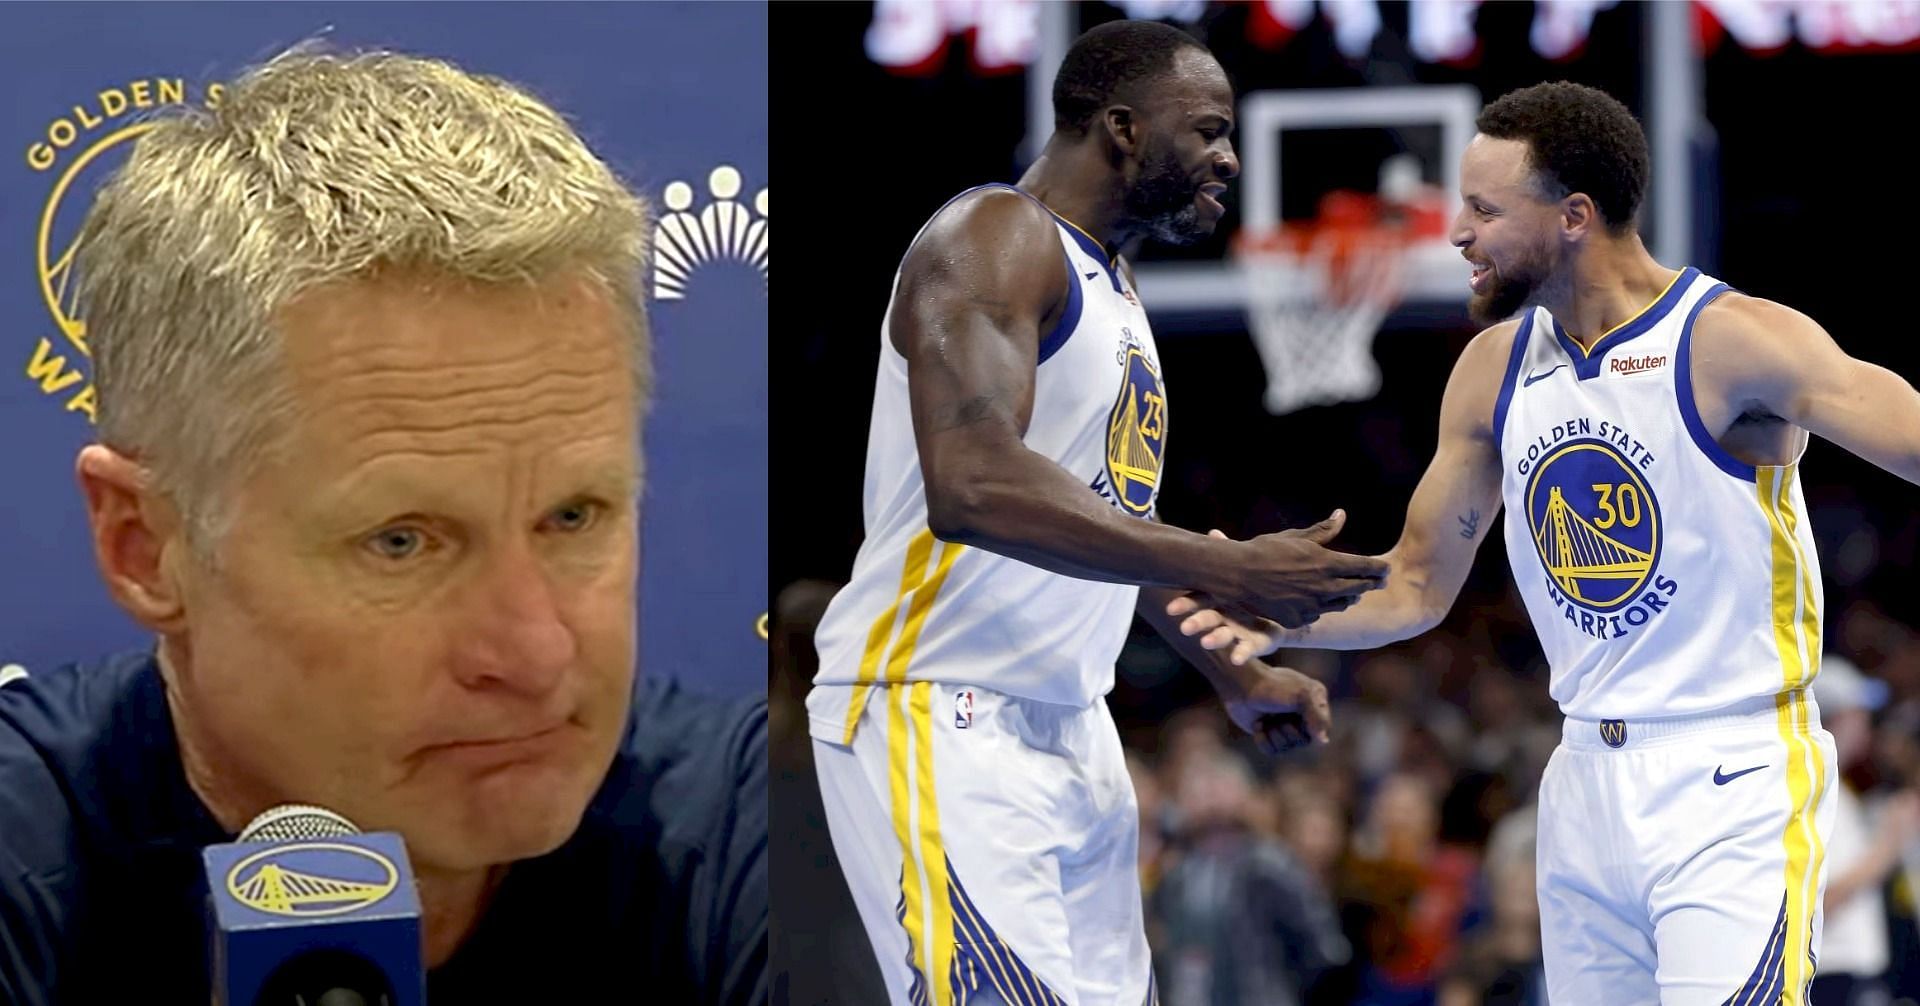 Golden State Warriors coach Steve Kerr and Warriors stars Draymond Green and Steph Curry